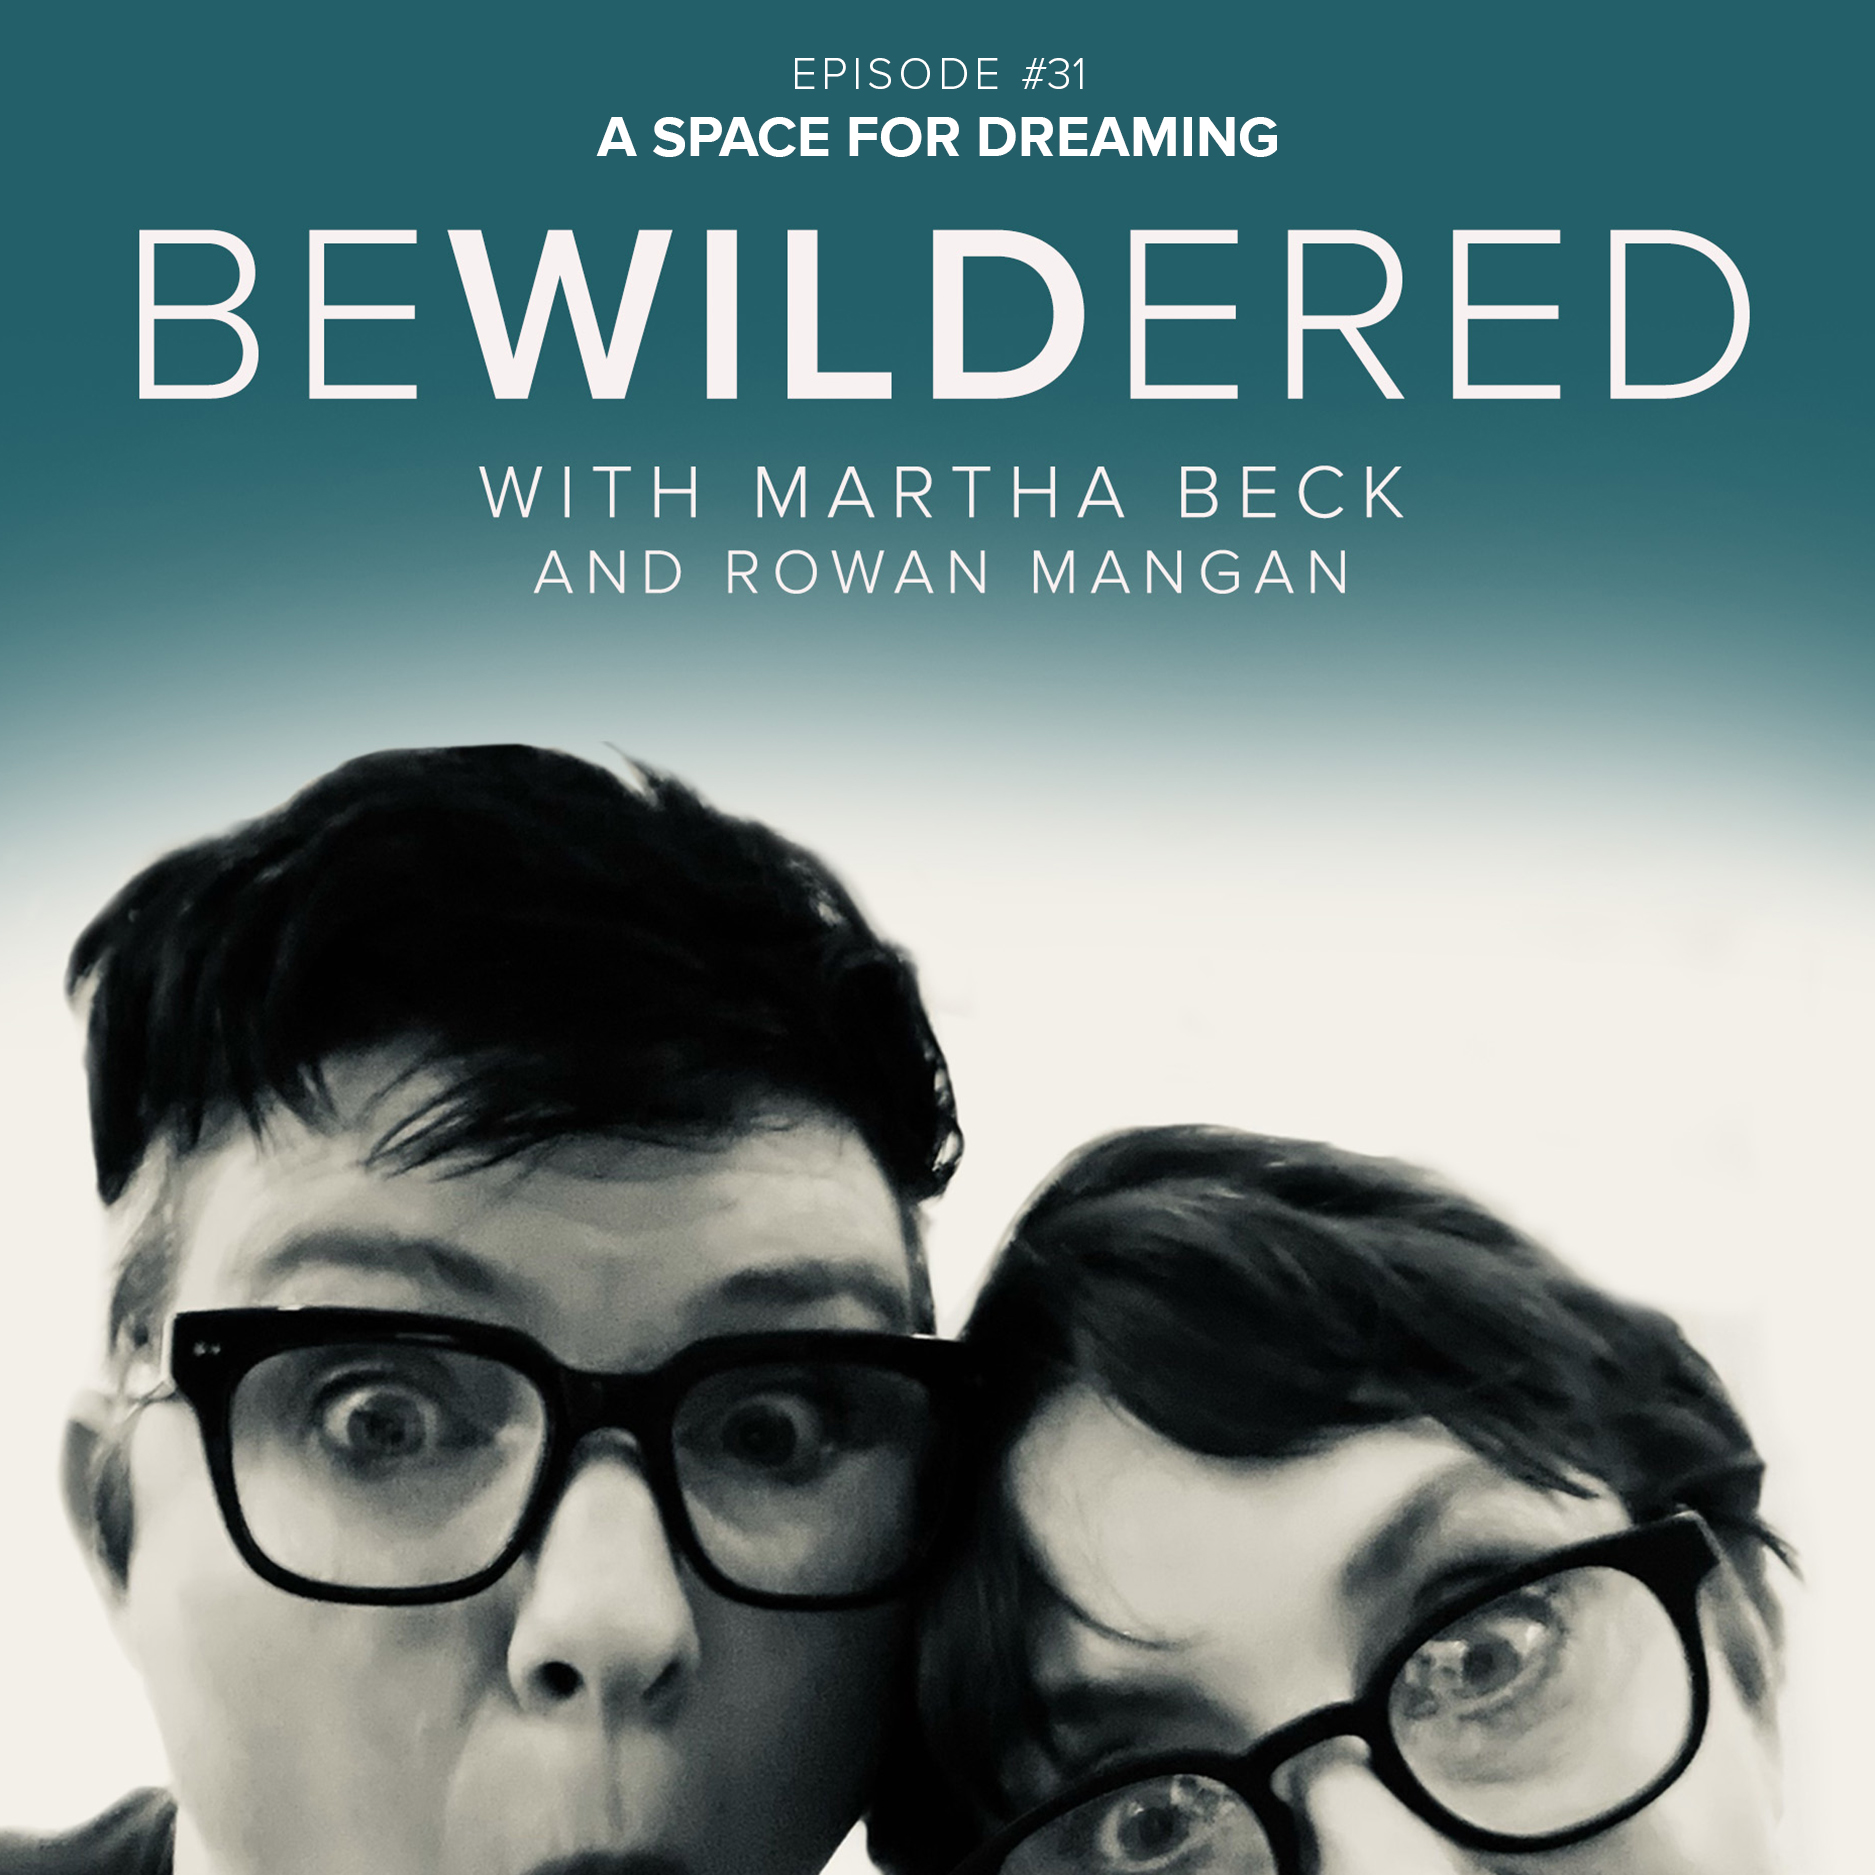 Image for Episode #31 A Space for Dreaming for the Bewildered Podcast with Martha Beck and Rowan Mangan